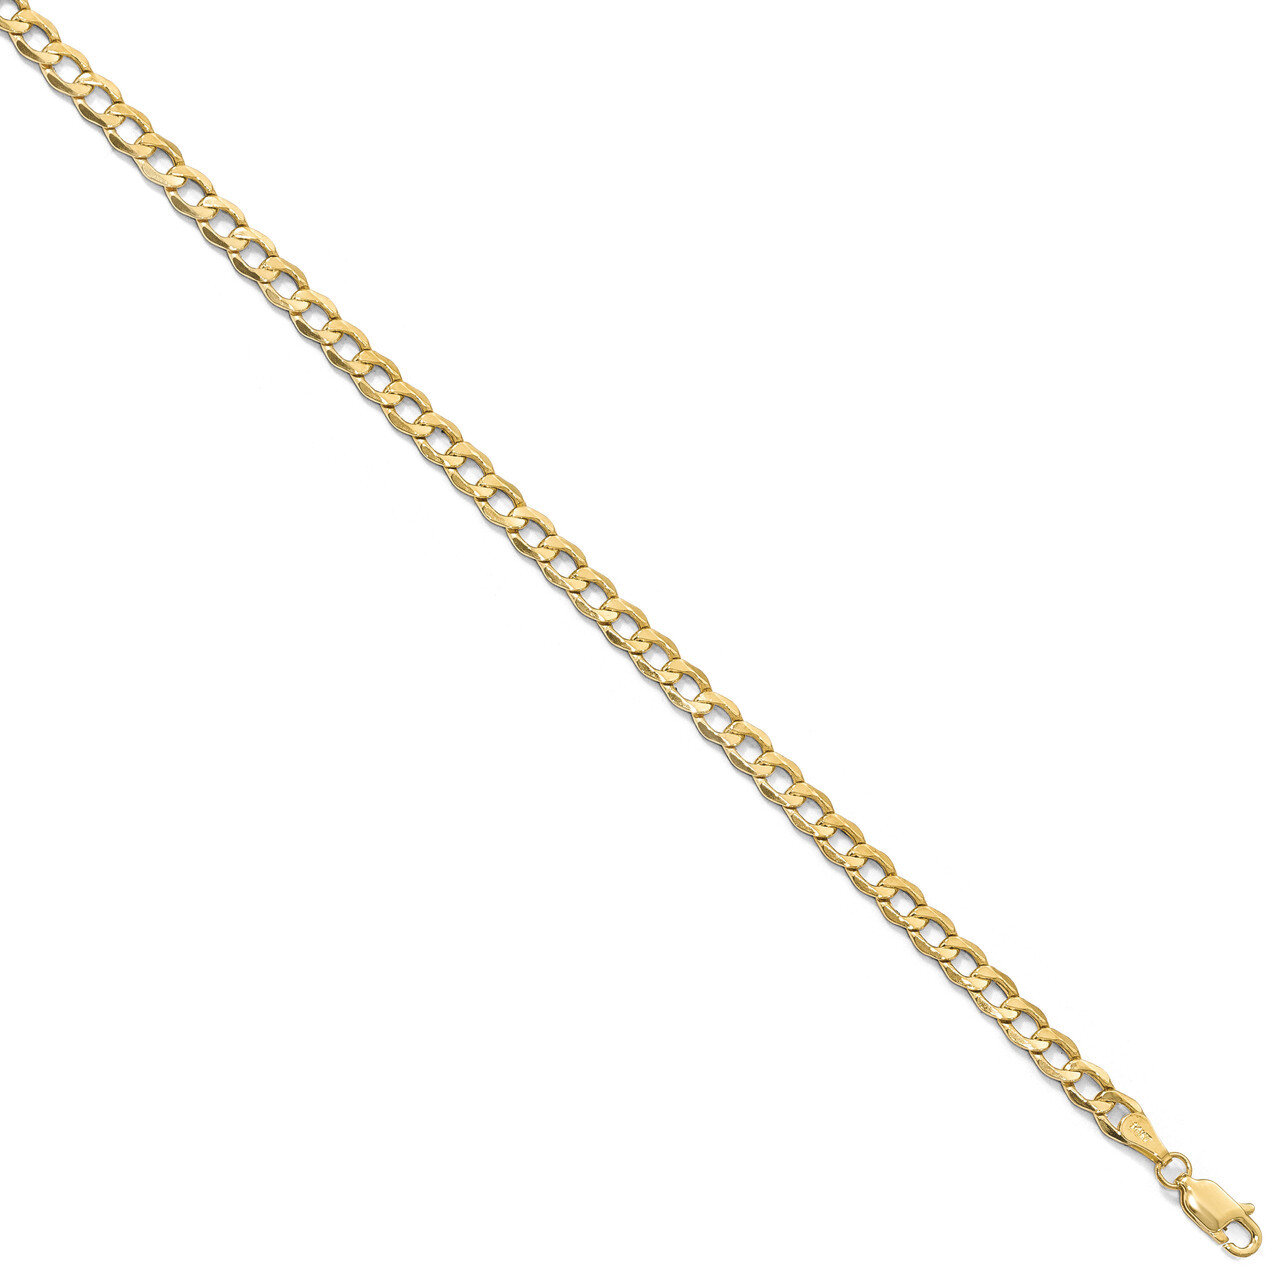 4.3mm Semi-Solid Curb Link Chain 18 Inch 10k Gold HB-8240-18